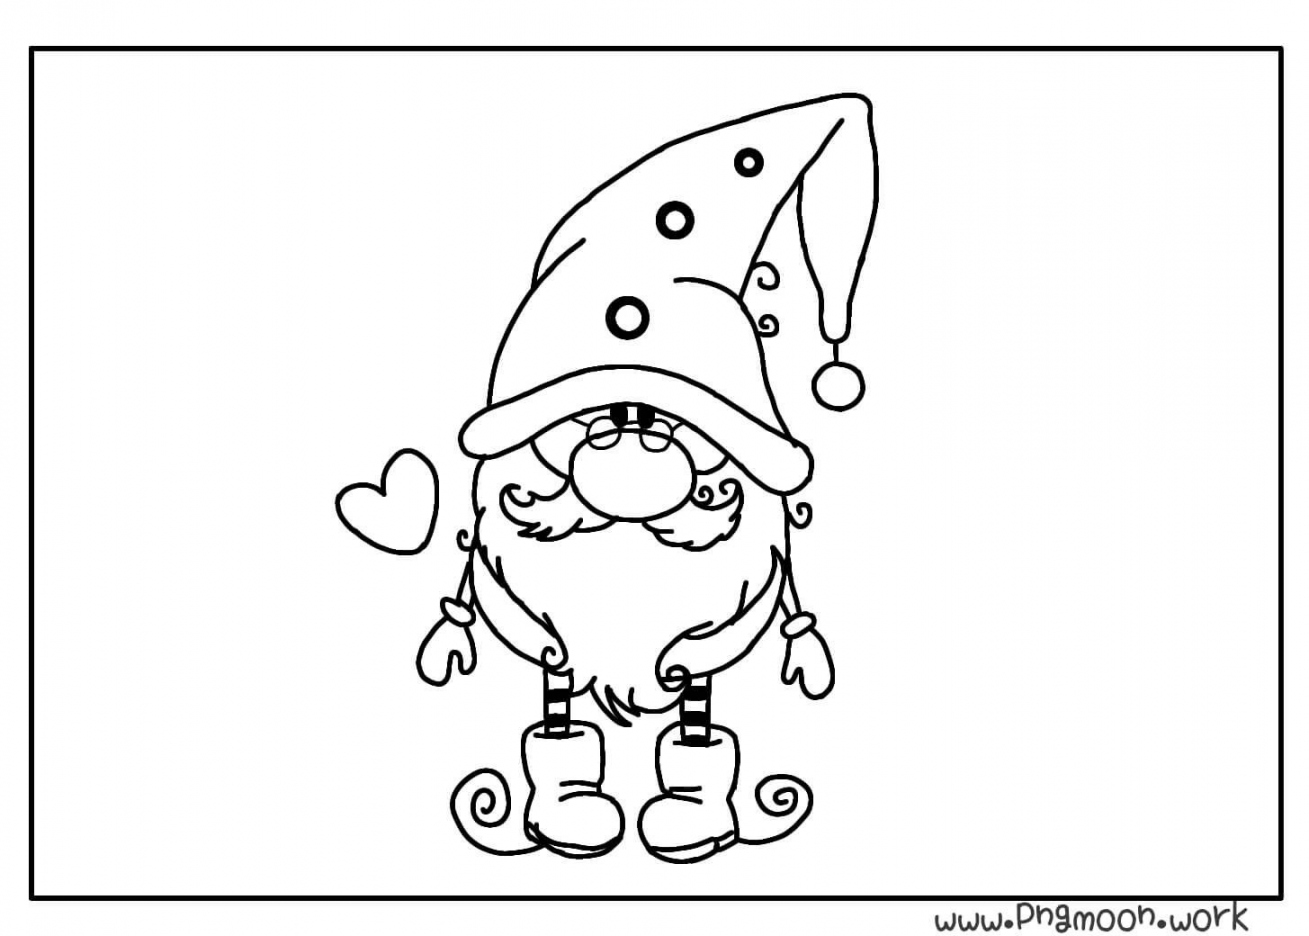 Cute Christmas Gnome Coloring Page - Pngmoon  Coloring pages  - FREE Printables - Free Printable Christmas Gnome Coloring Page